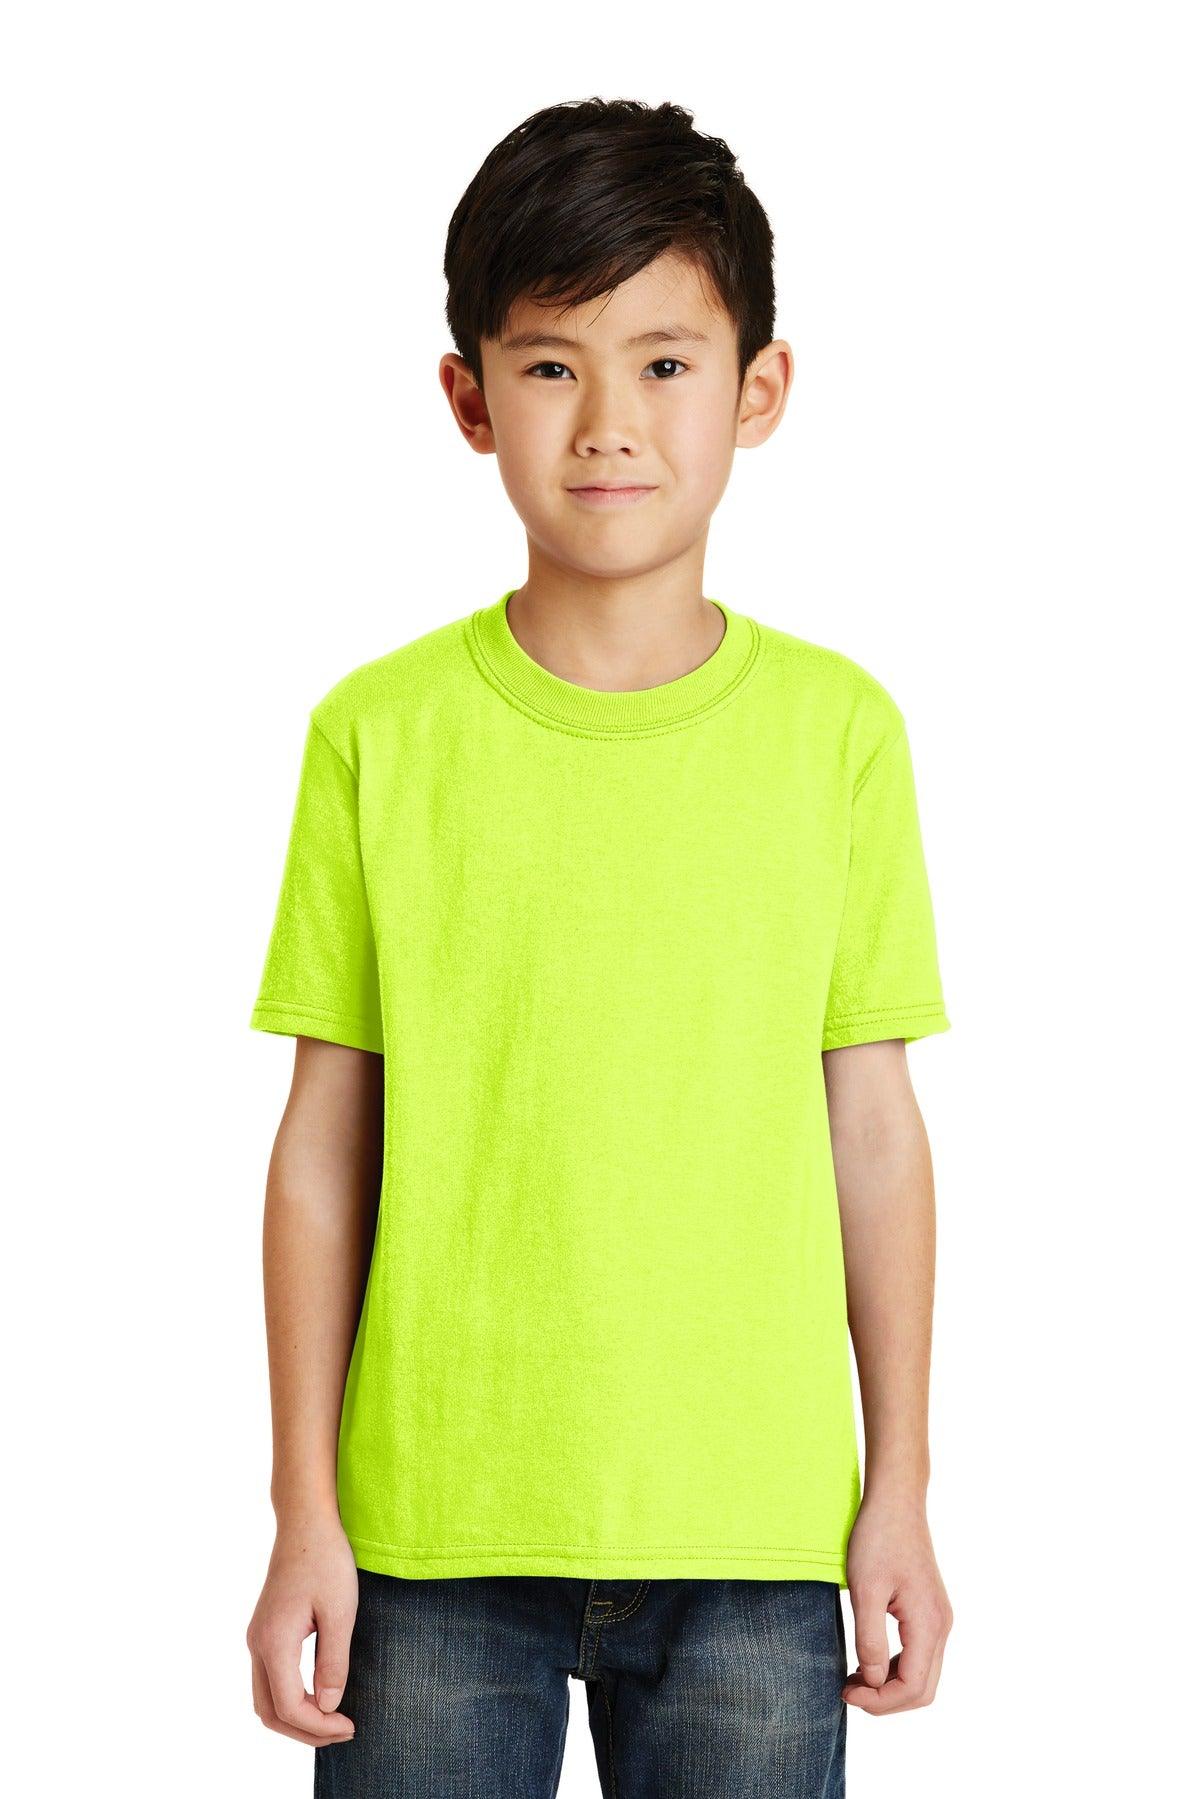 Port & Company - Youth Core Blend Tee. PC55Y - Dresses Max